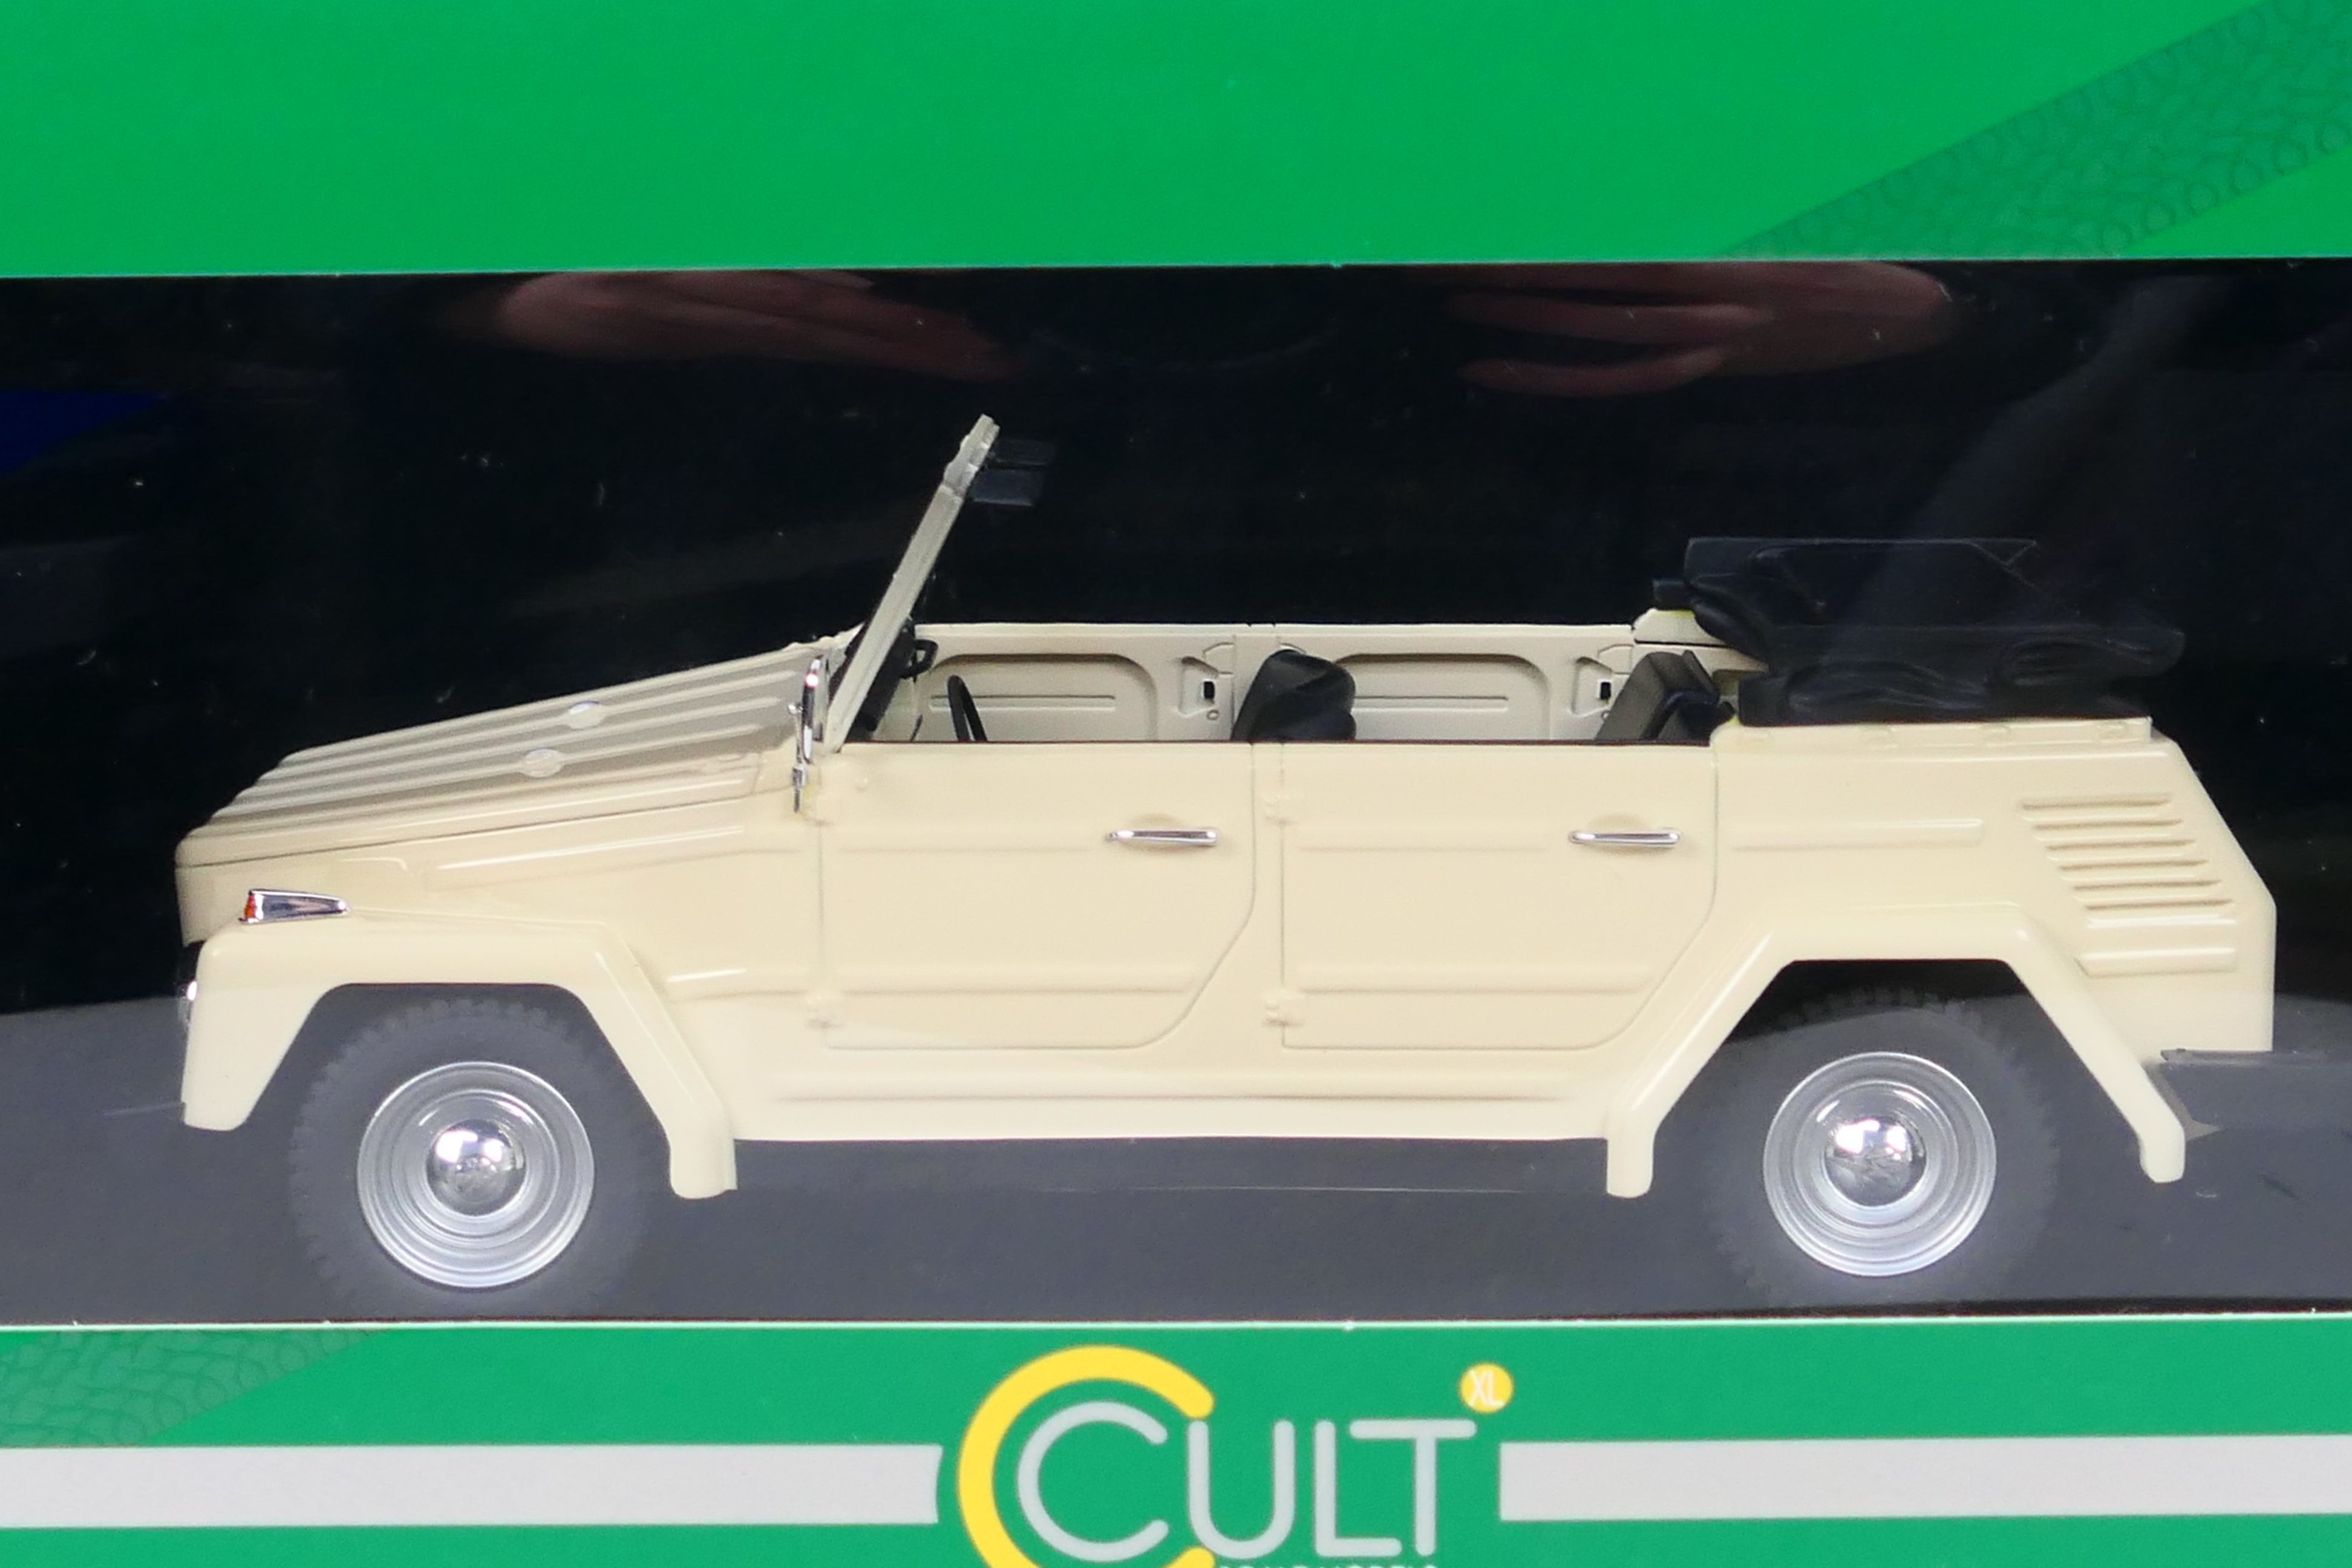 Cult Scale Models - A boxed 1:18 scale Cult Scale Models #CML026-2 Volkswagen 181. - Image 2 of 3